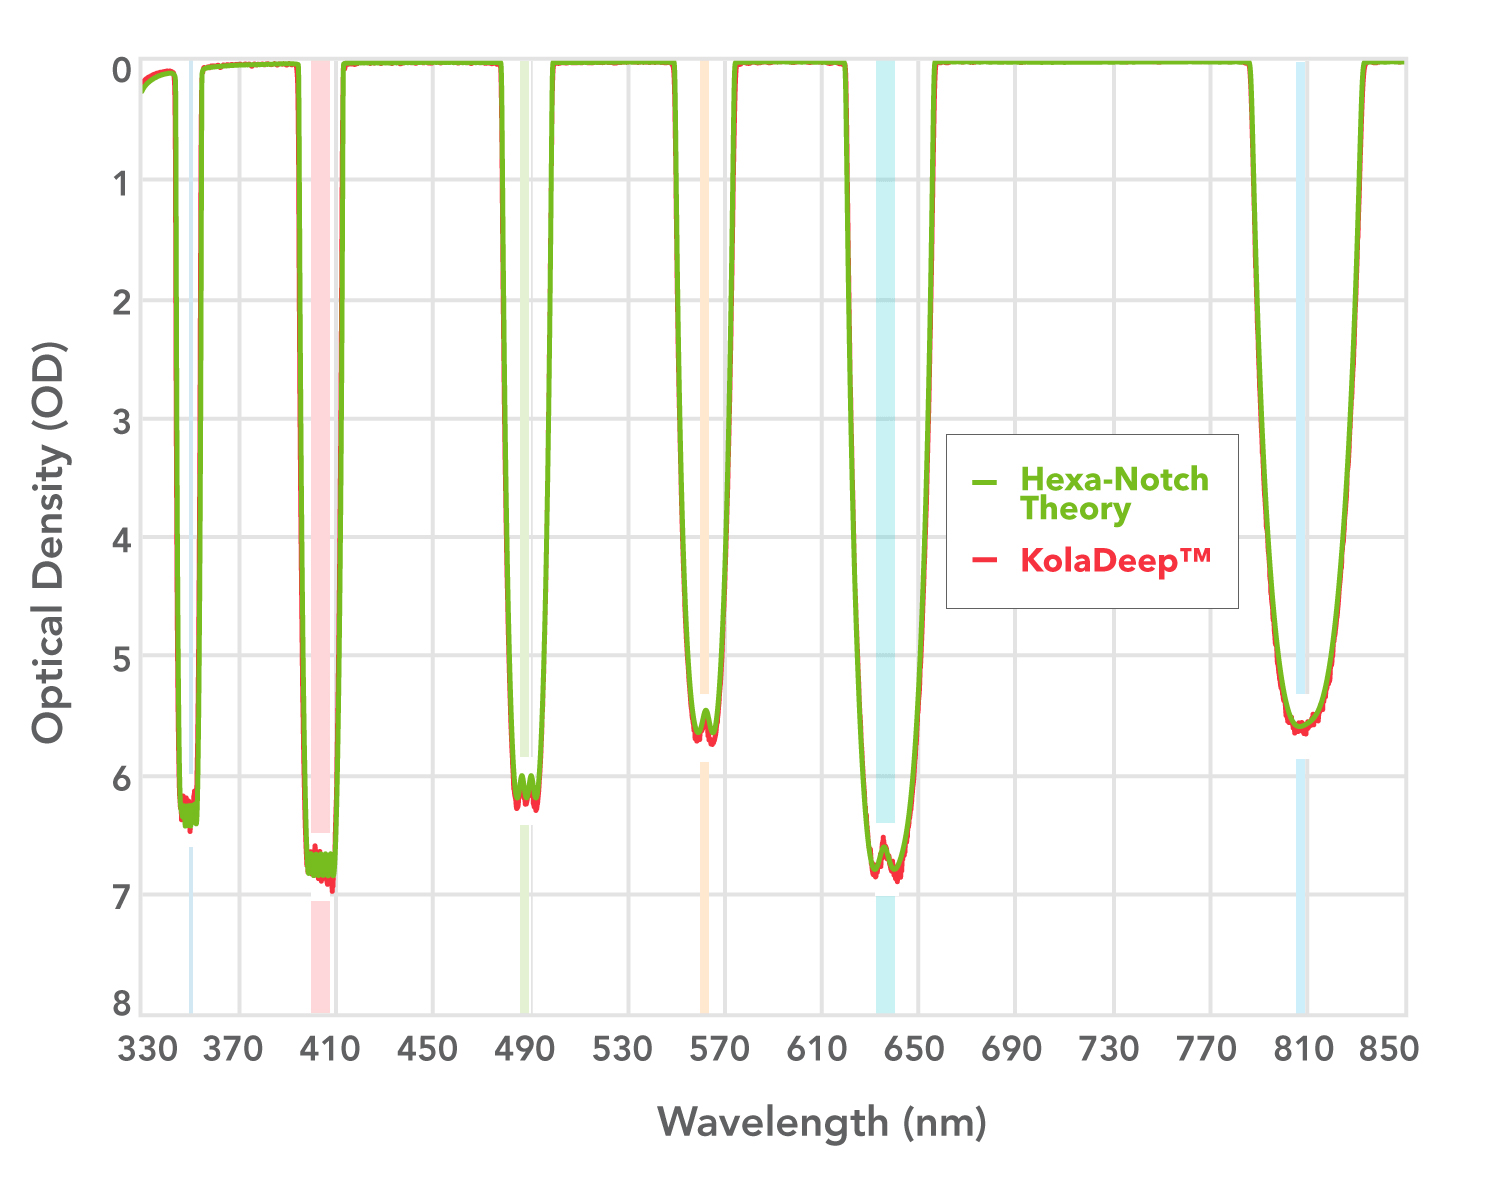 six-notch filter agrees with KolaDeep measurements down to OD6-7